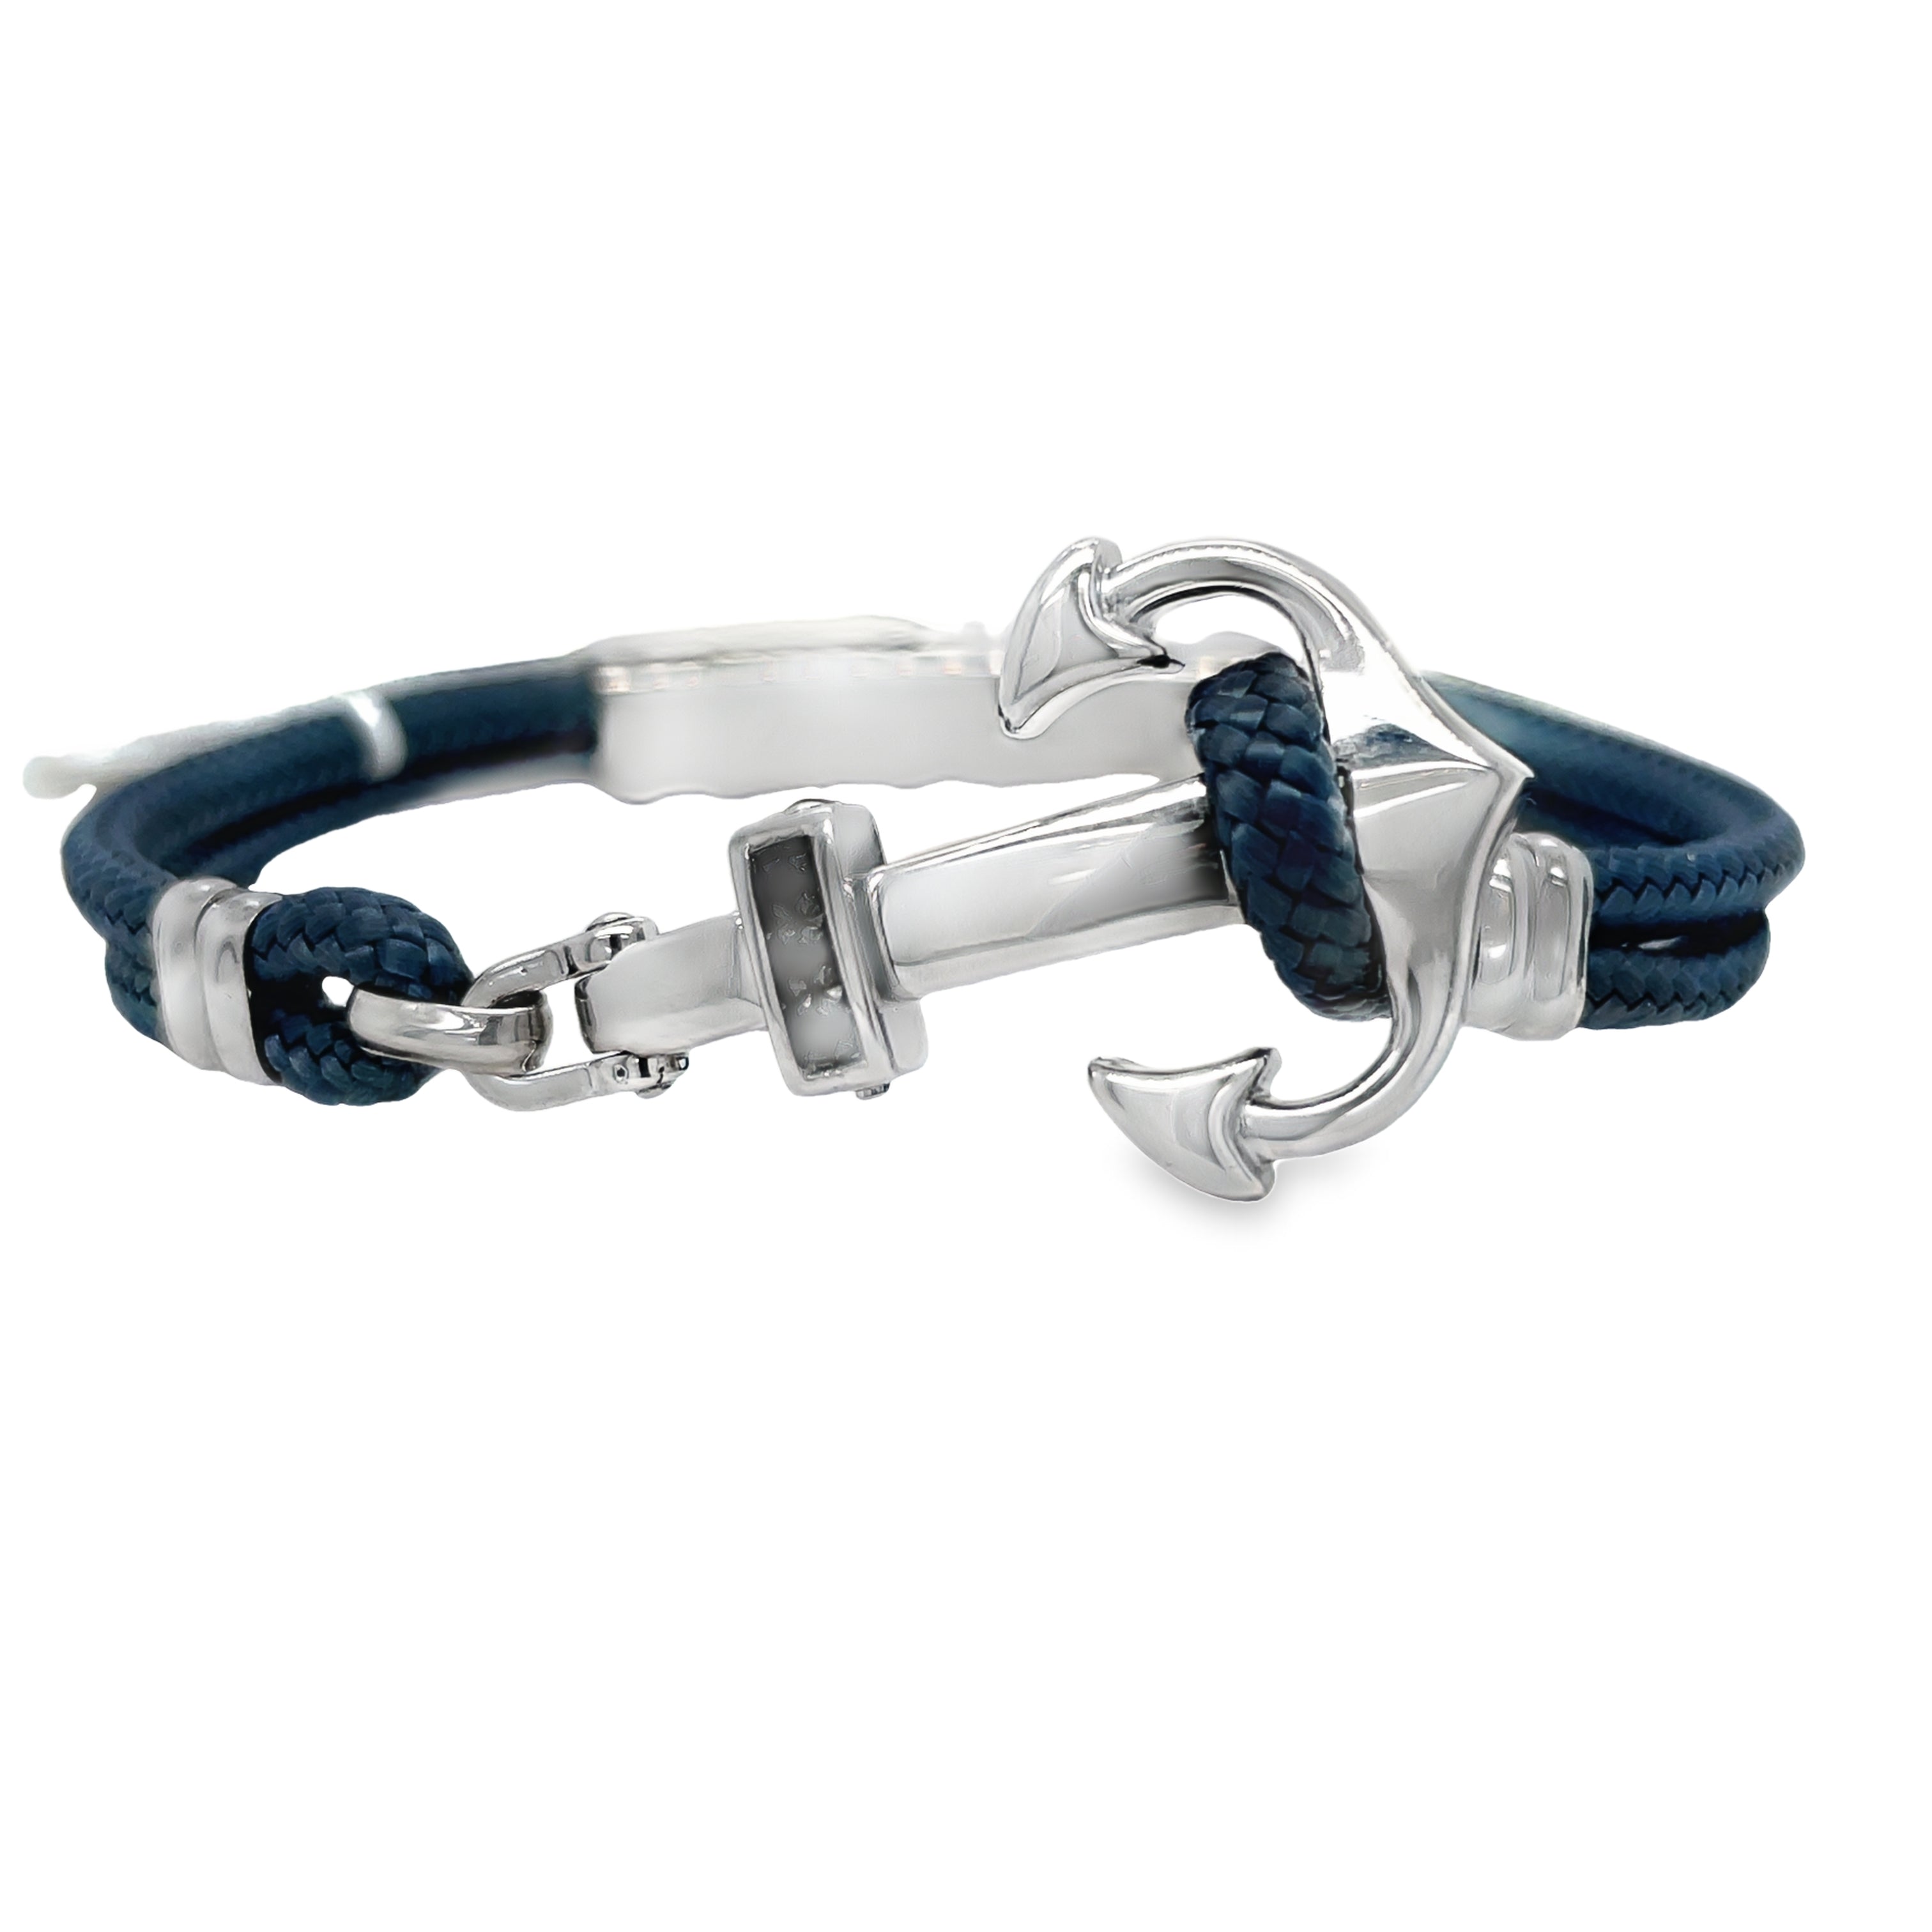 Upgrade your style with the Zancan Sterling Silver Anchor Light Blue Cord Bracelet. Made in Italy, this bracelet boasts a sleek sterling silver design coated with rhodium for added shine. The teal cord color adds a unique touch, while the adjustable slide lock ensures a perfect fit. Elevate your look today.